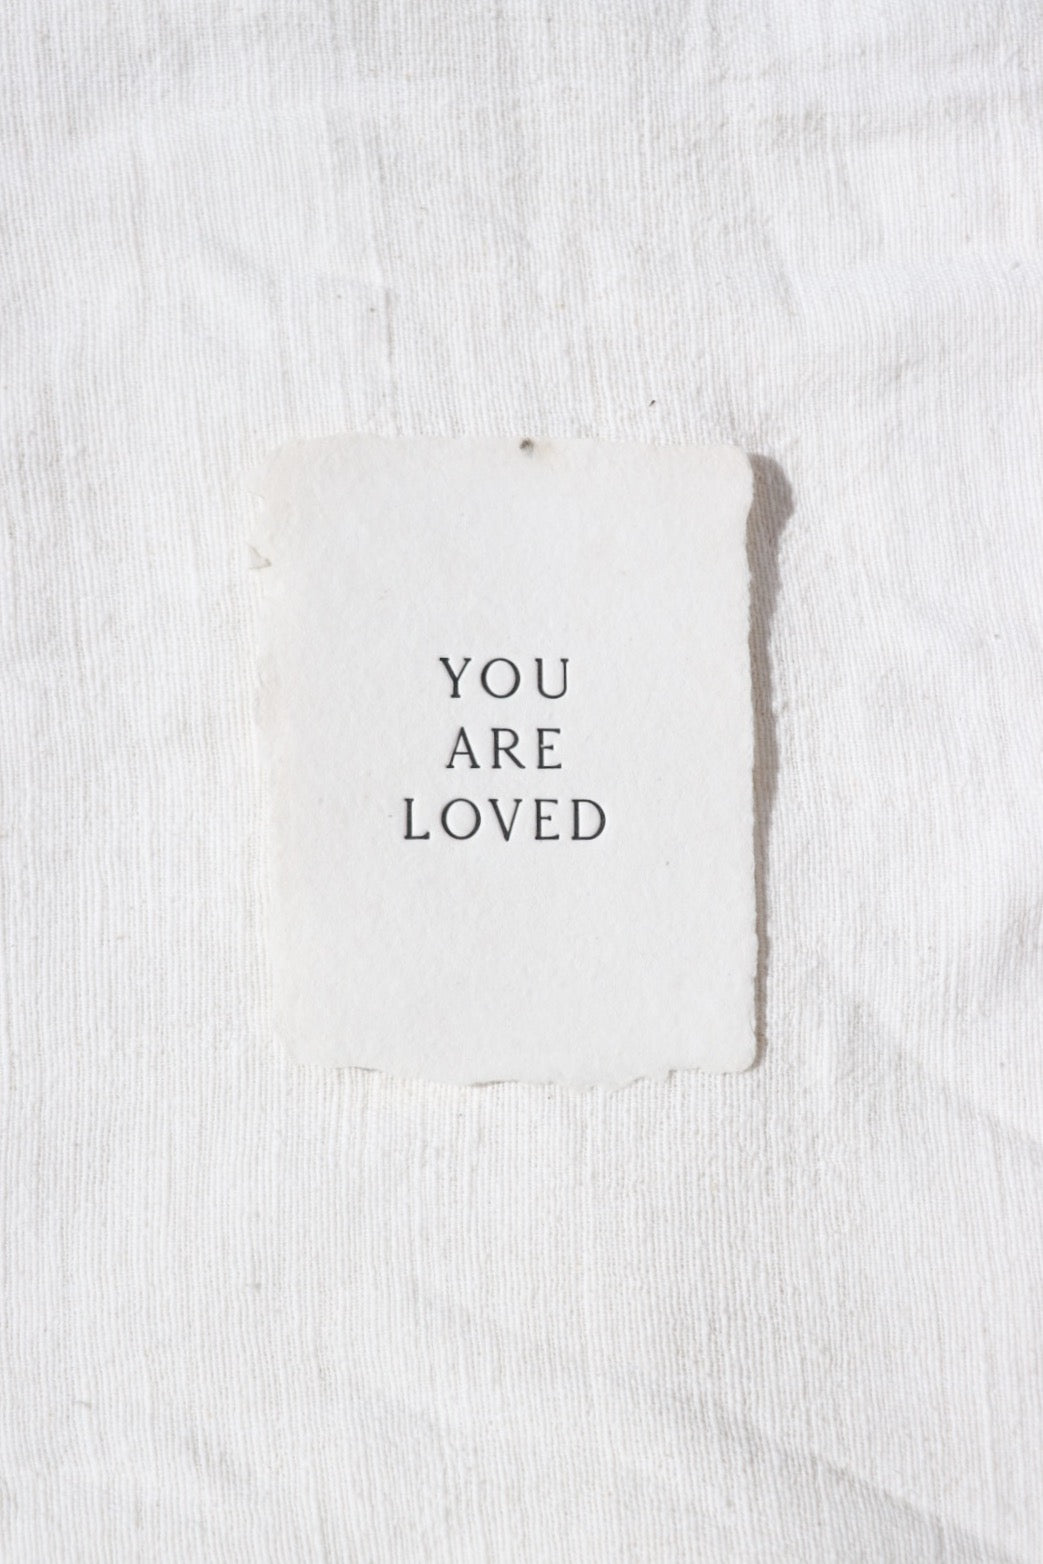 You Are Loved Flat Card